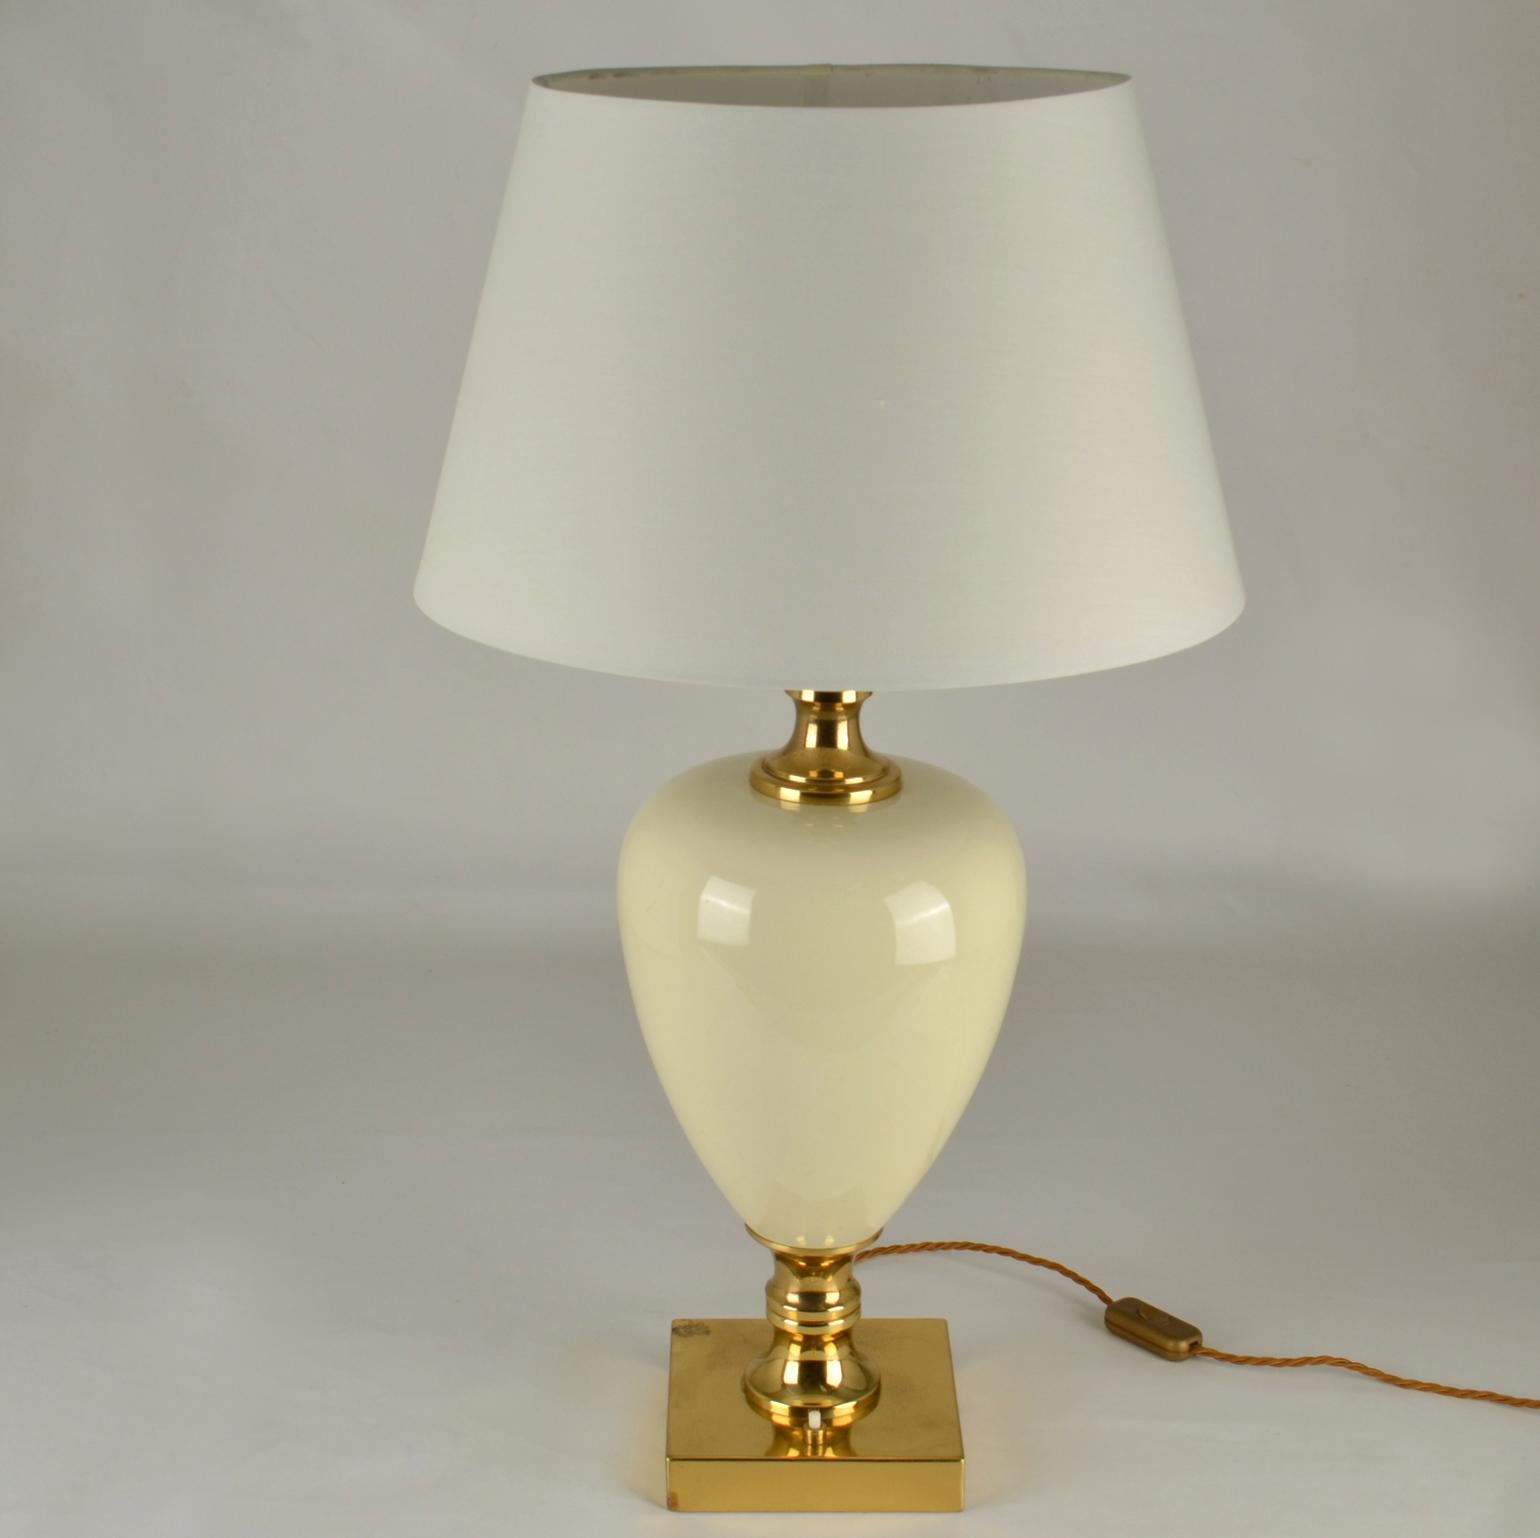 Pair of Cream Porcelain and Brass Table Lamps by Zonca, Italy, 1970s For Sale 6